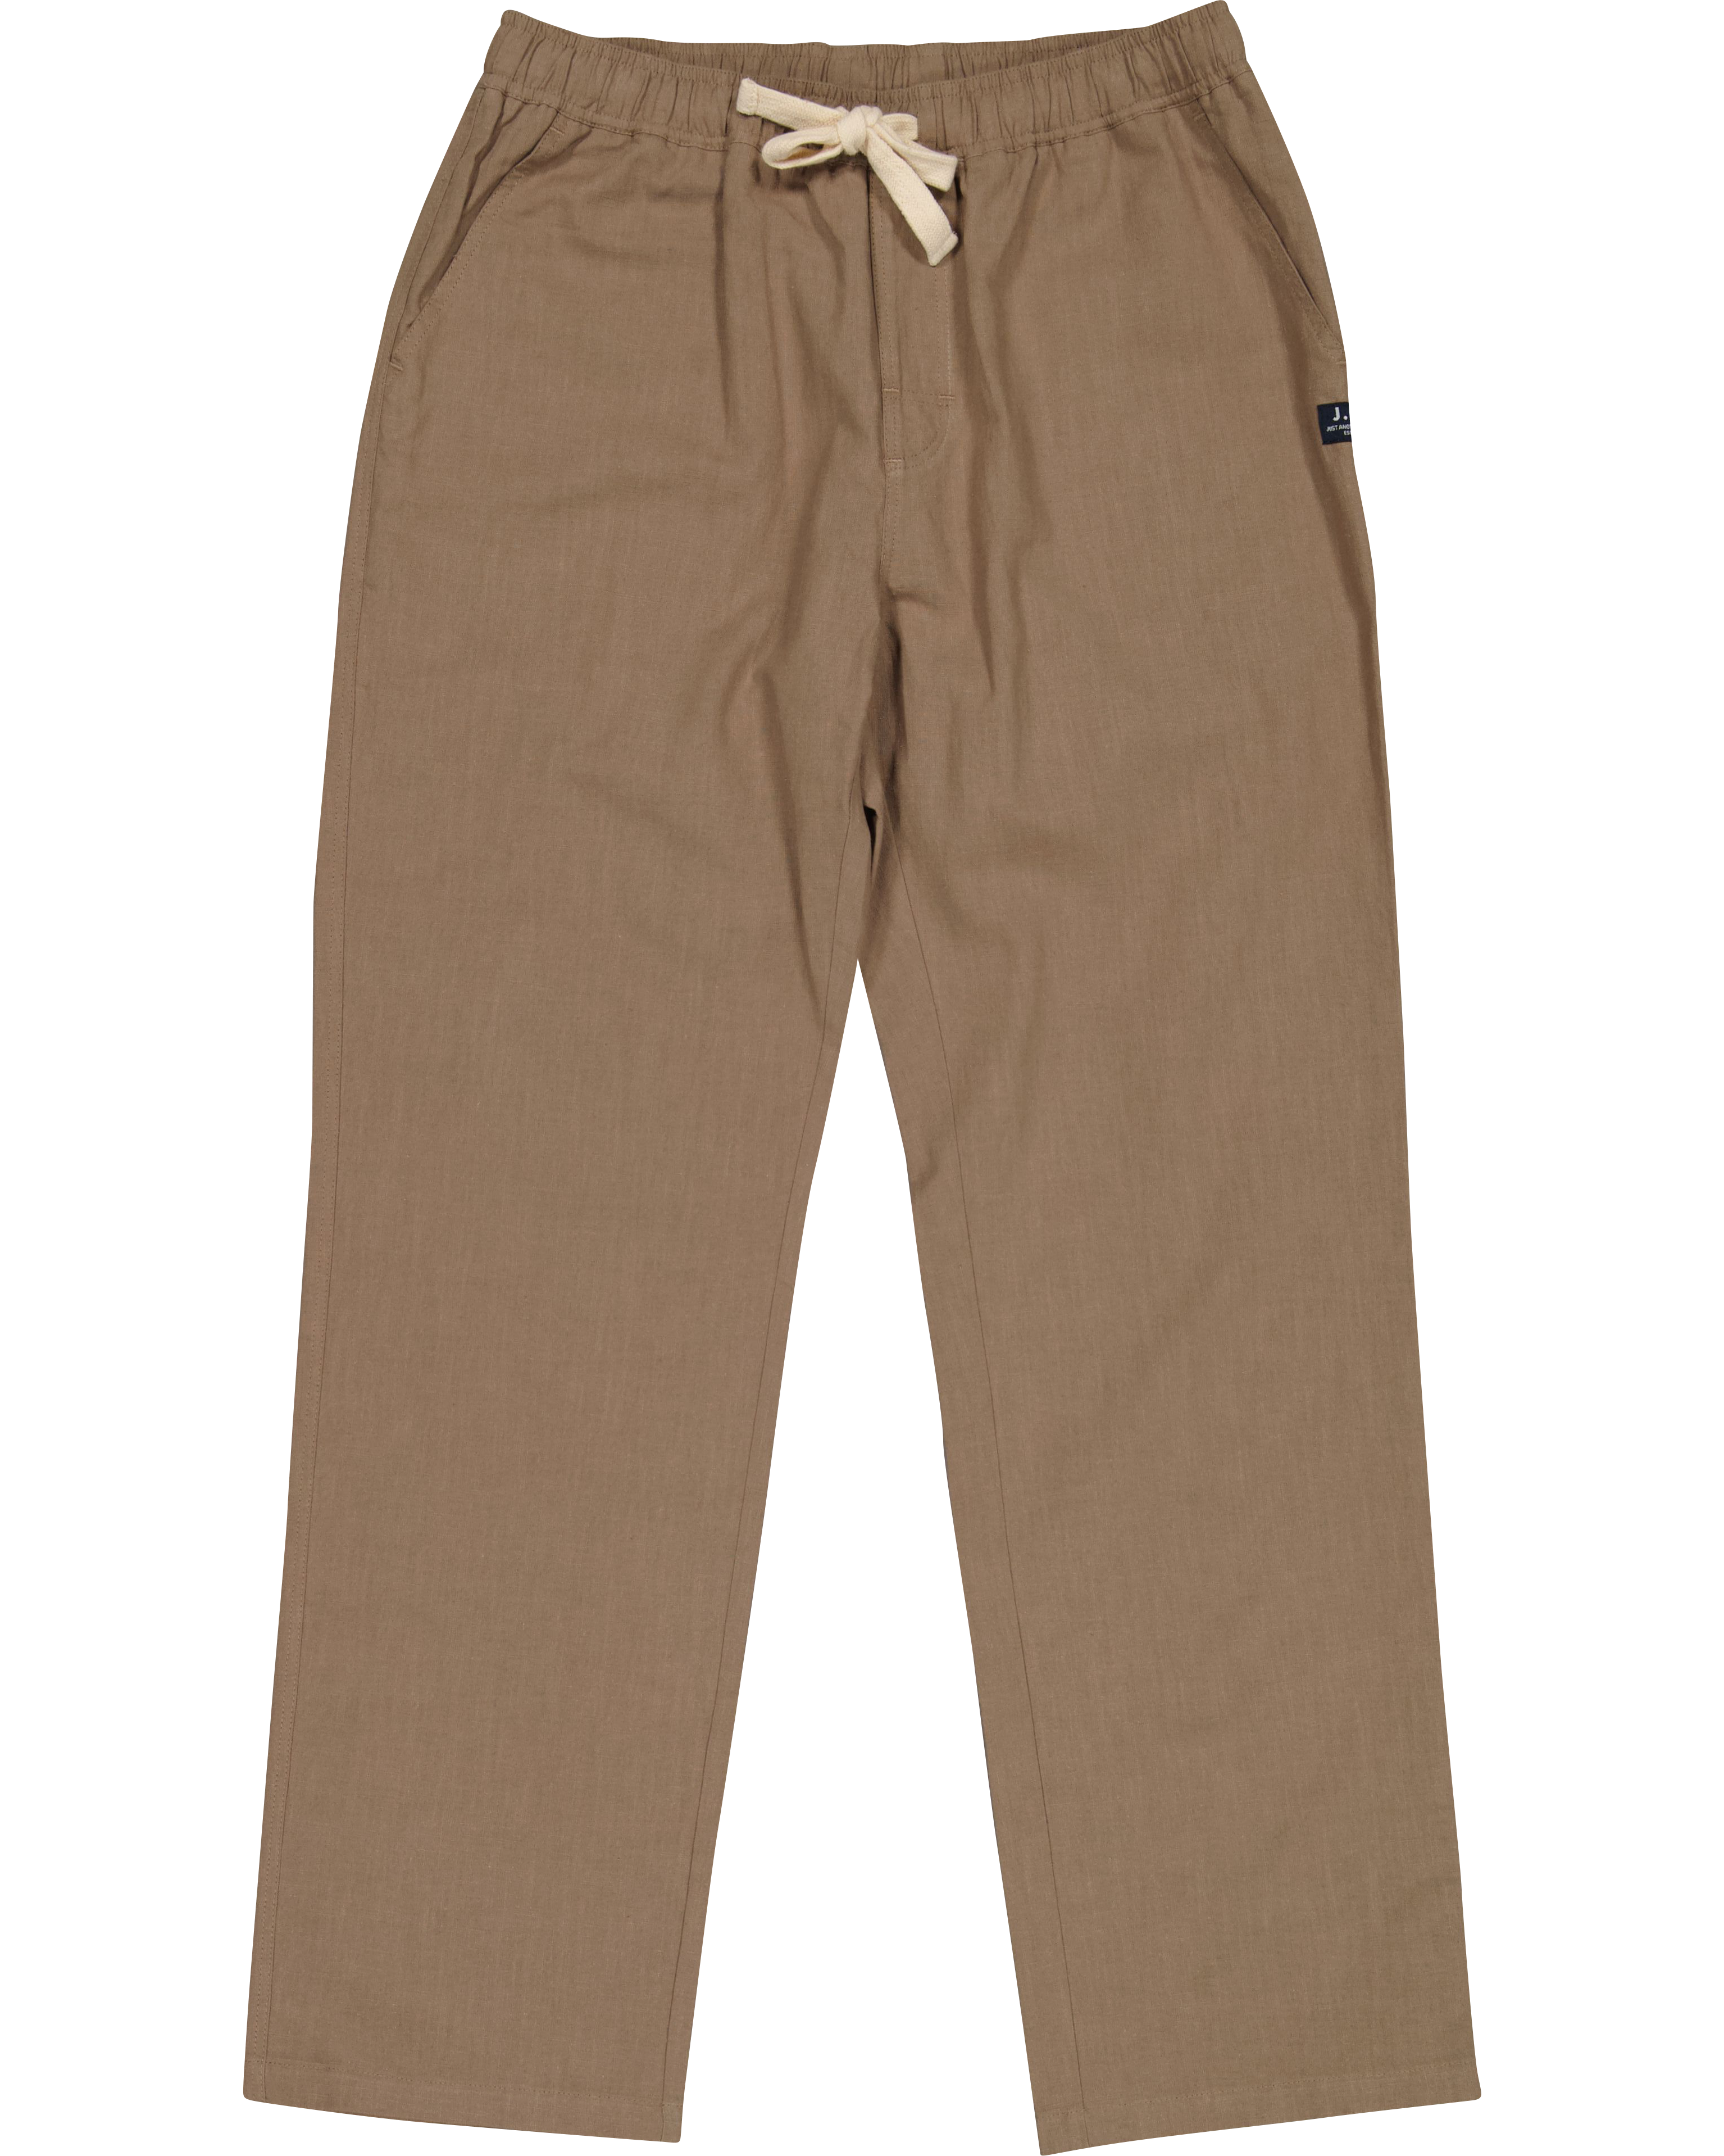 Just Another Fisherman Dinghy Linen Pants - Light Brown